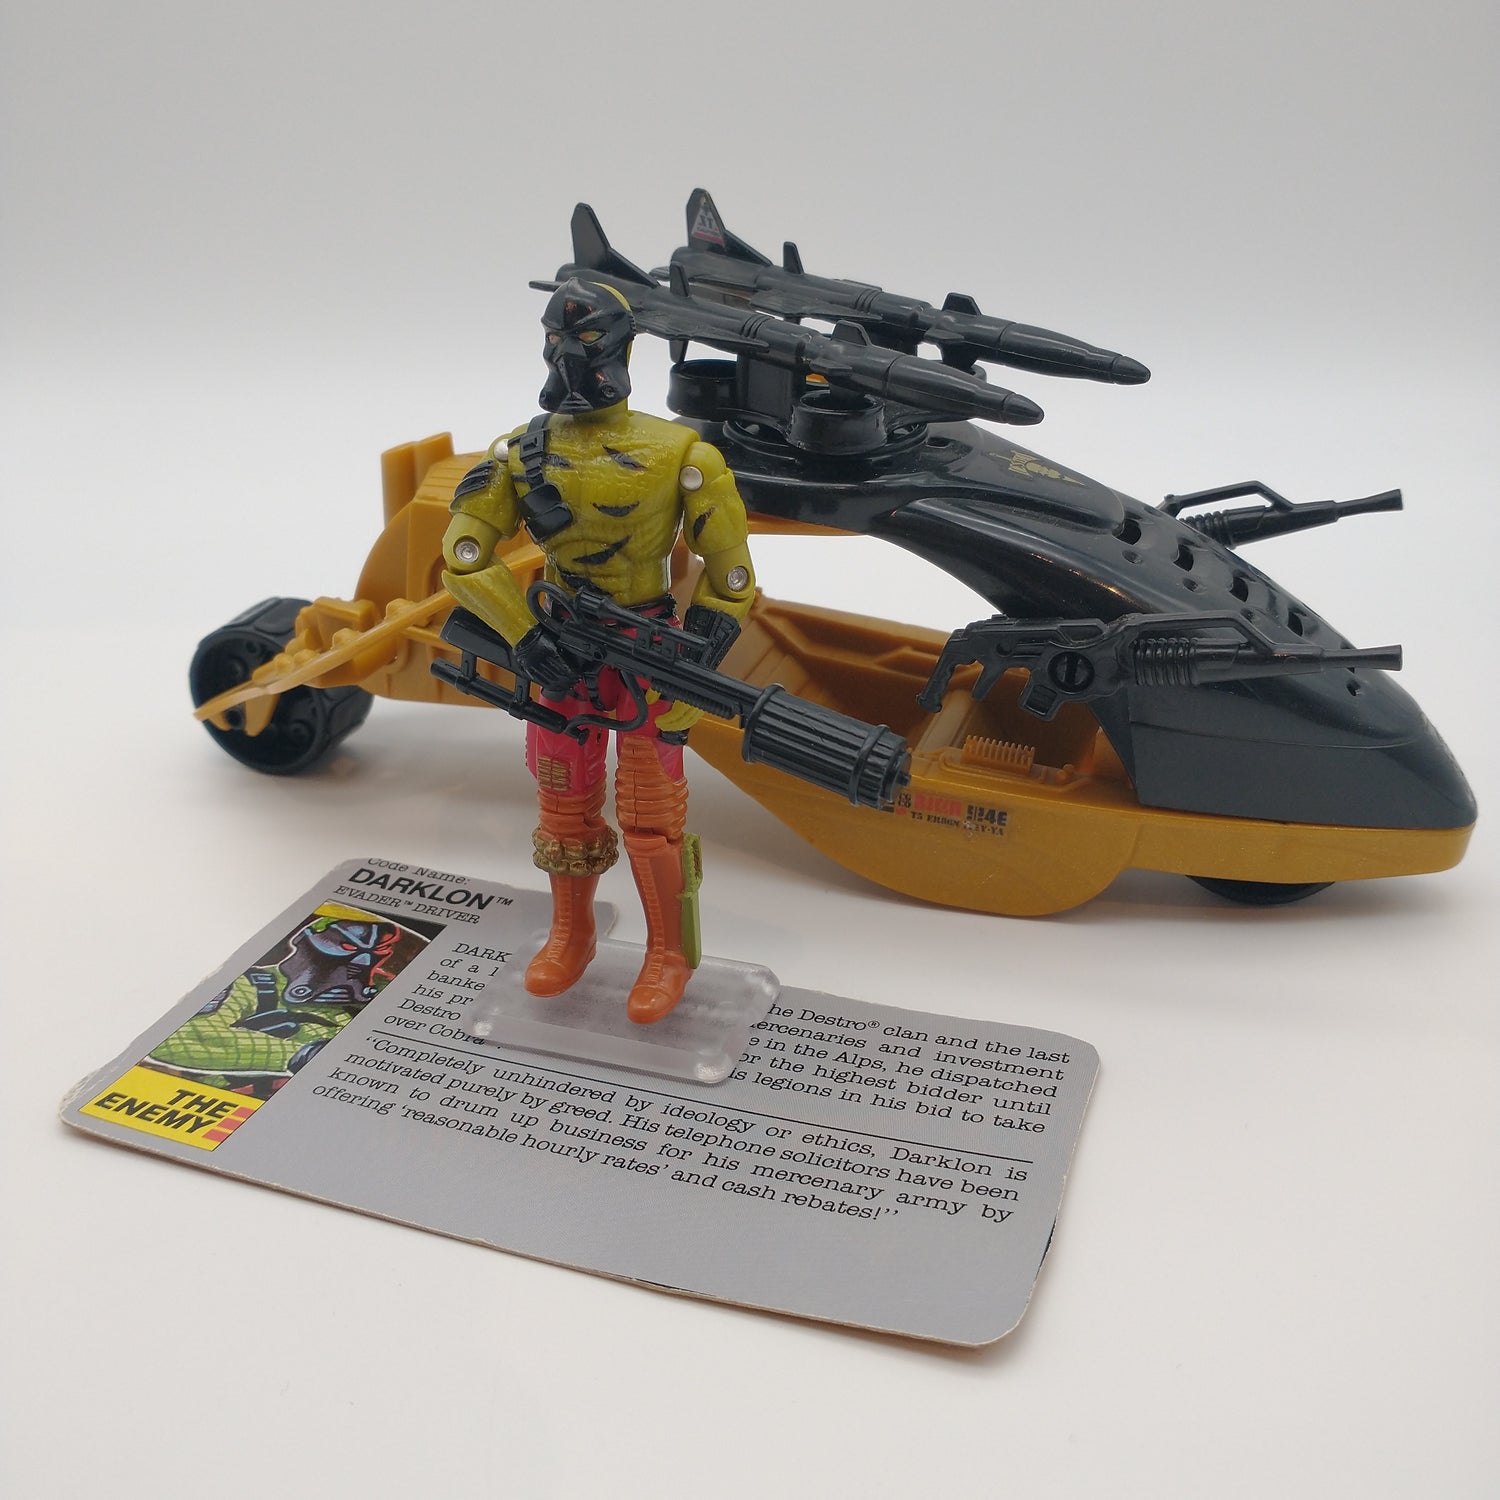 The action figure standing in front of the card with accessories